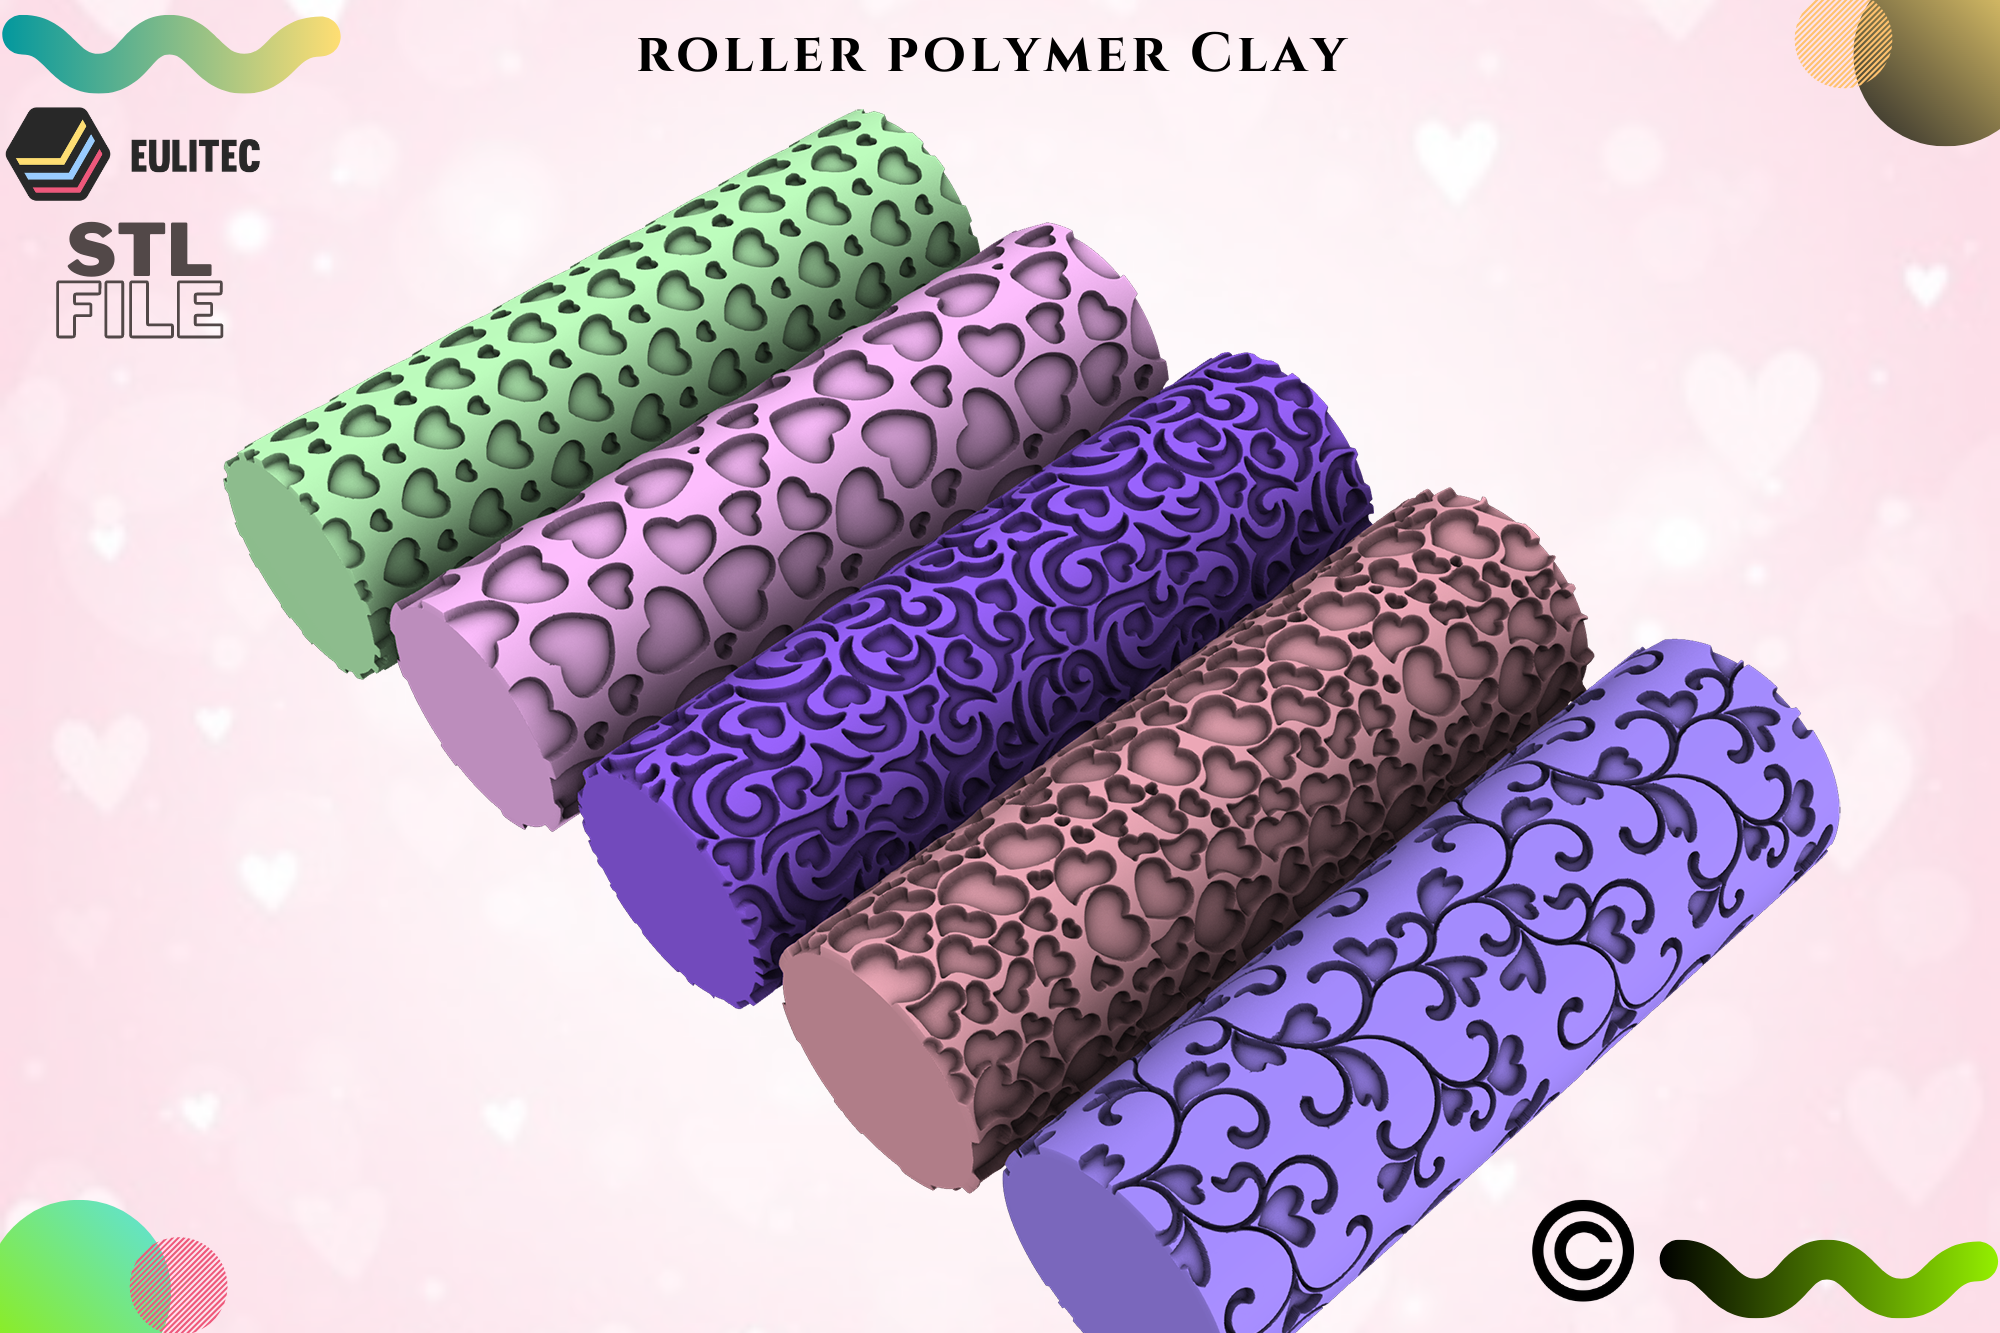 Roller-Polymer-Clay-3.png Download STL file Roller Polymer Clay 5-pack/COPYRIGHTED LICENSE • 3D printing design, EULITEC